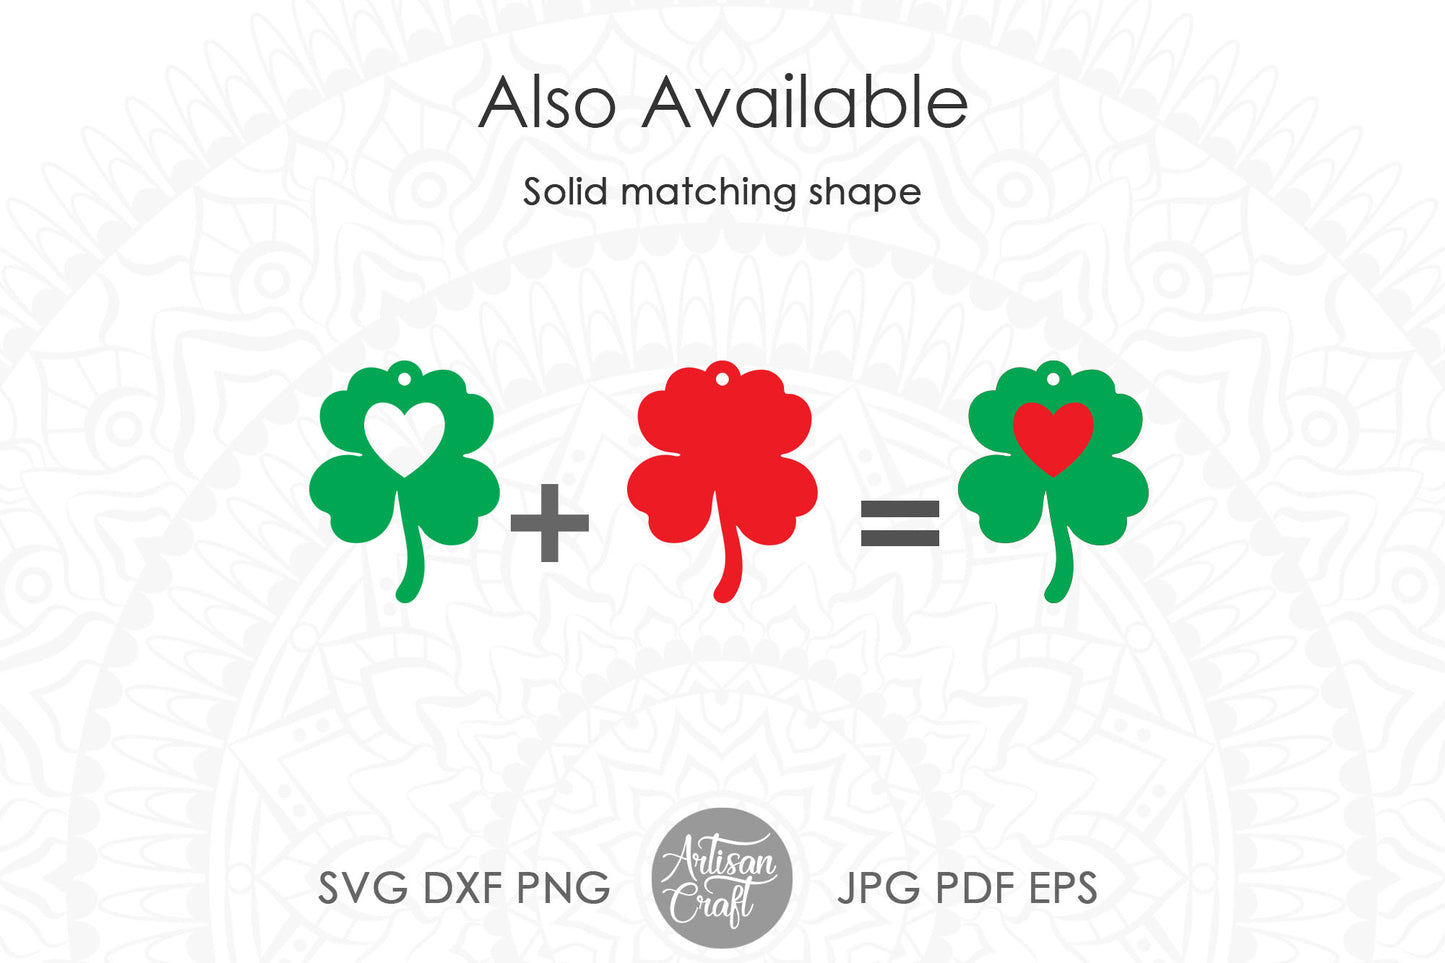 Four Leaf Clover Earrings SVG for St Patrick's Day